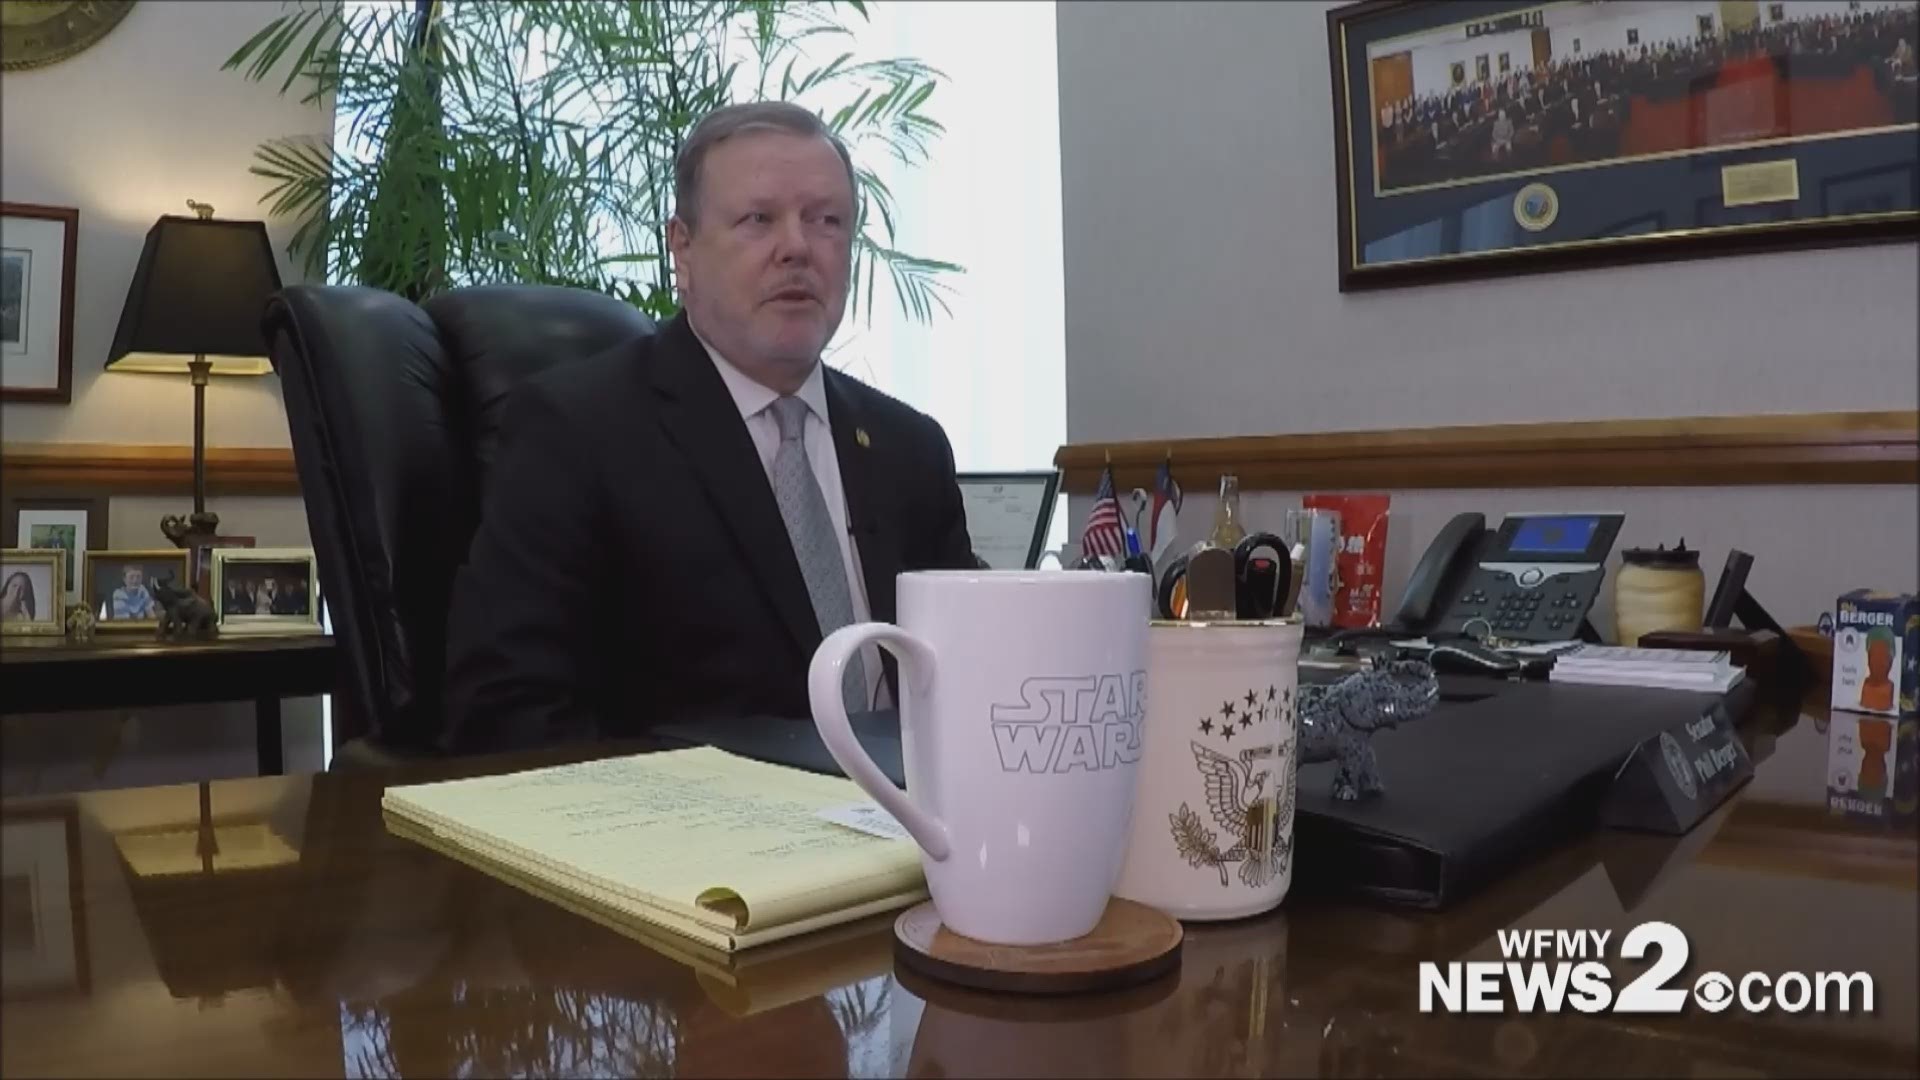 Talking about a myriad of issues, NC Senate leader Phil Berger talked to WFMY News 2's Alma McCarty in his Raleigh office.